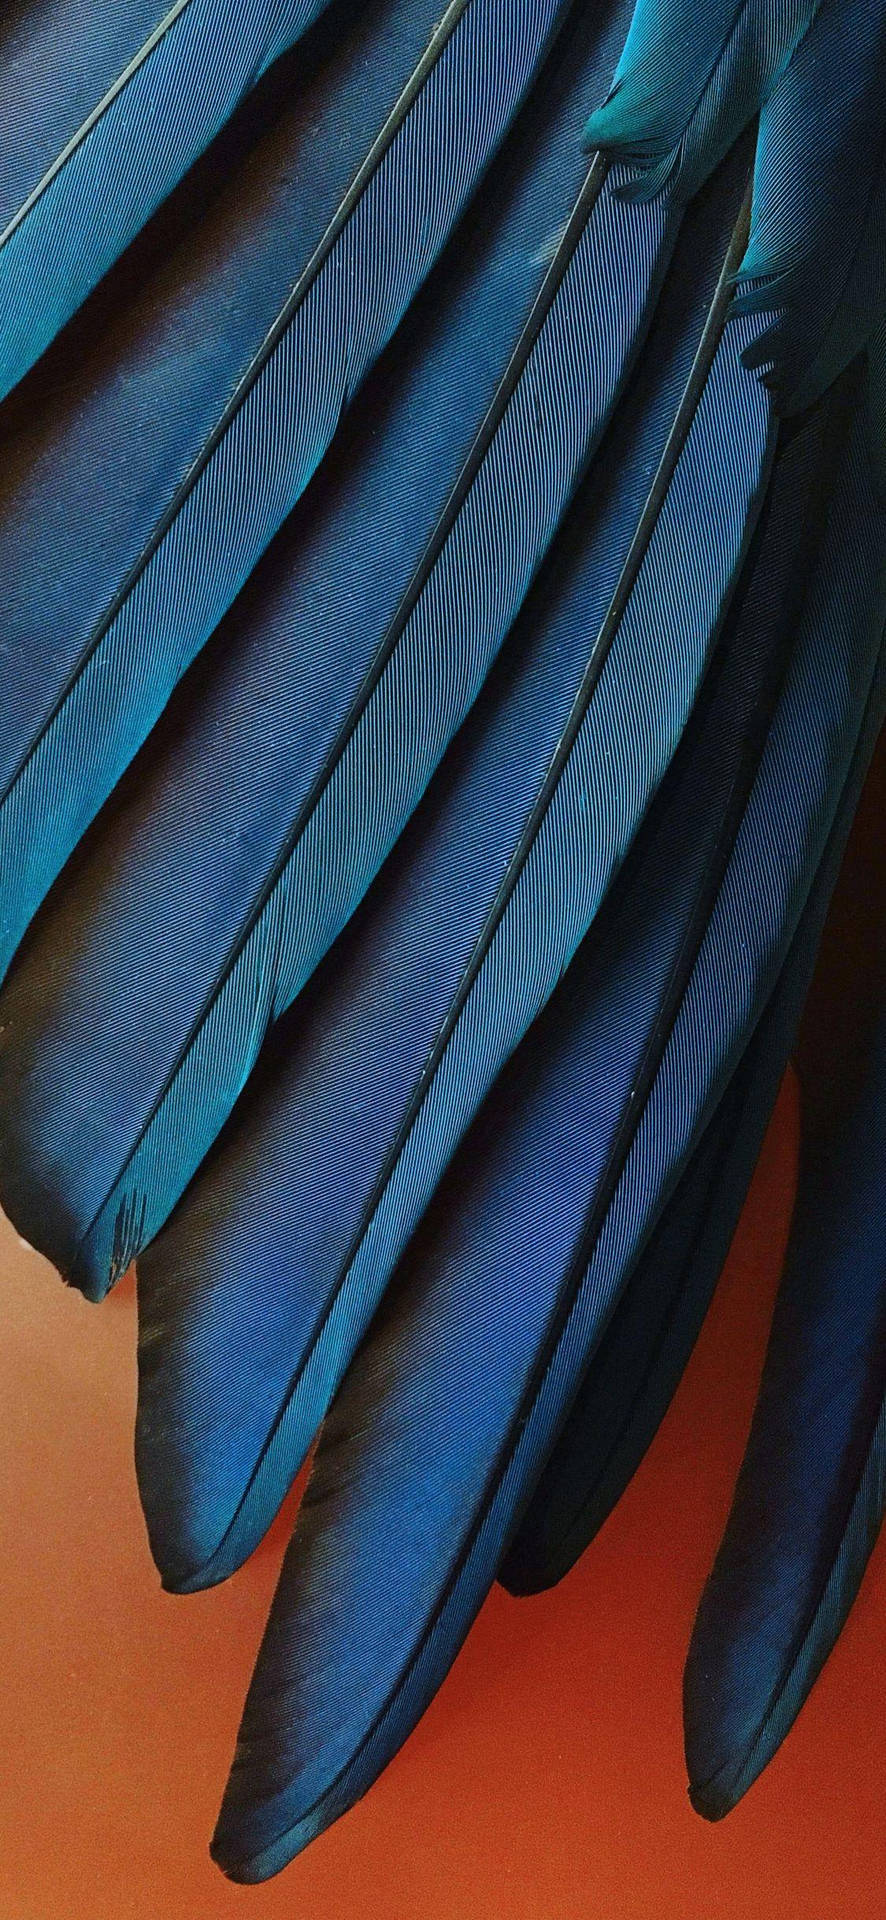 Download iPhone 12 Pro Blue Feathers Wallpaper